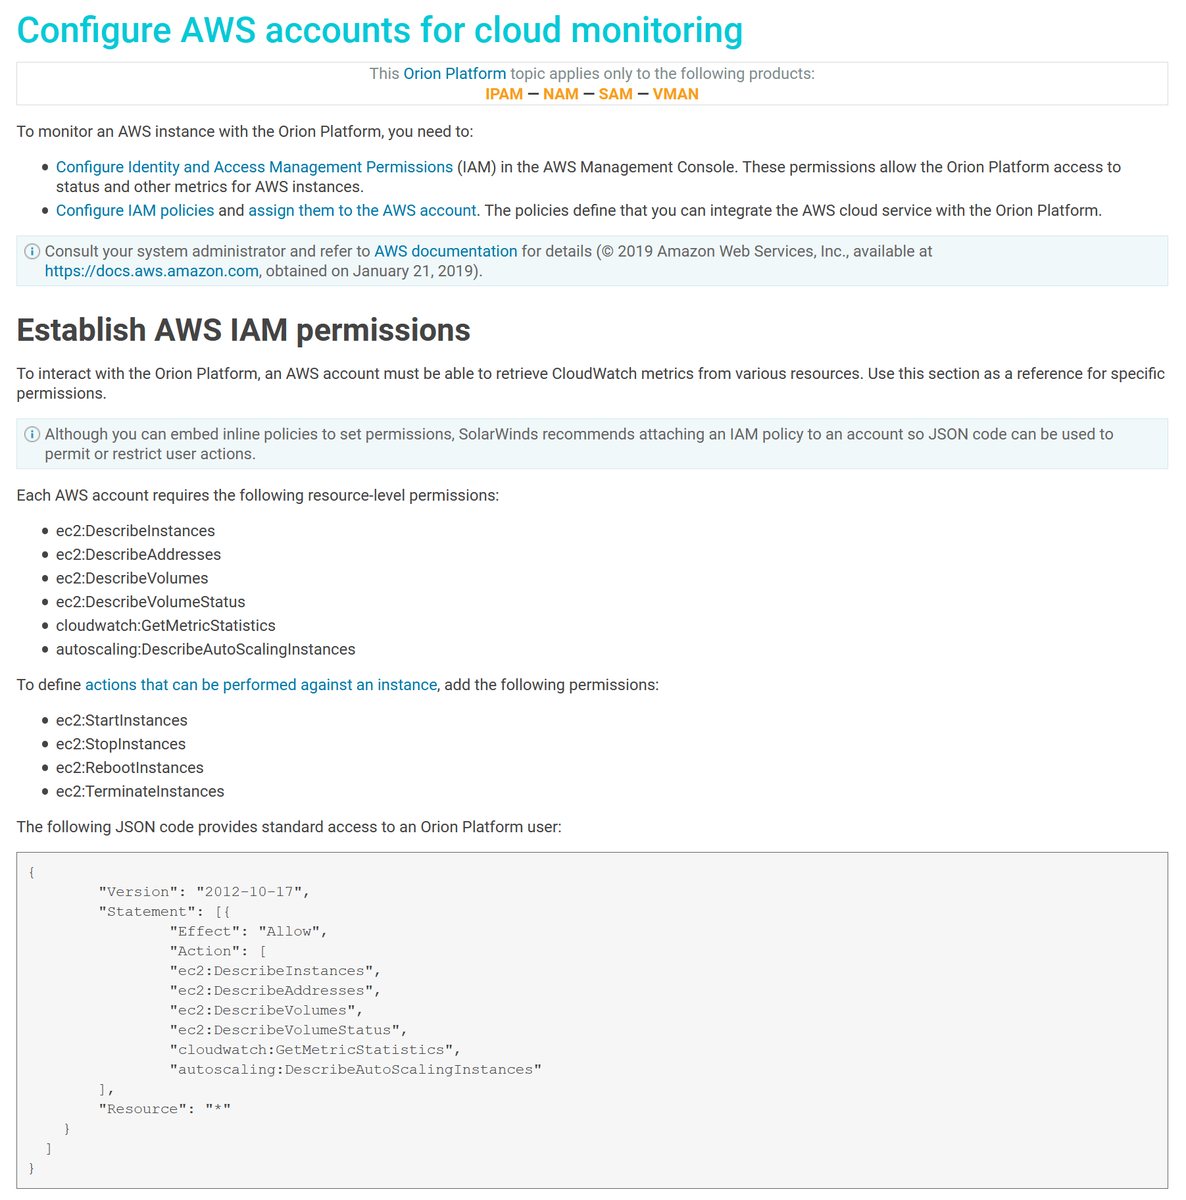 SolarWinds monitors the cloud (AWS) and requires rights to do so:To define actions that can be performed against an instance, add the following permissions:  ec2:StartInstances  ec2:StopInstances  ec2:RebootInstances  ec2:TerminateInstances https://documentation.solarwinds.com/en/Success_Center/orionplatform/Content/Core-Cloud-Configure-AWS.htm